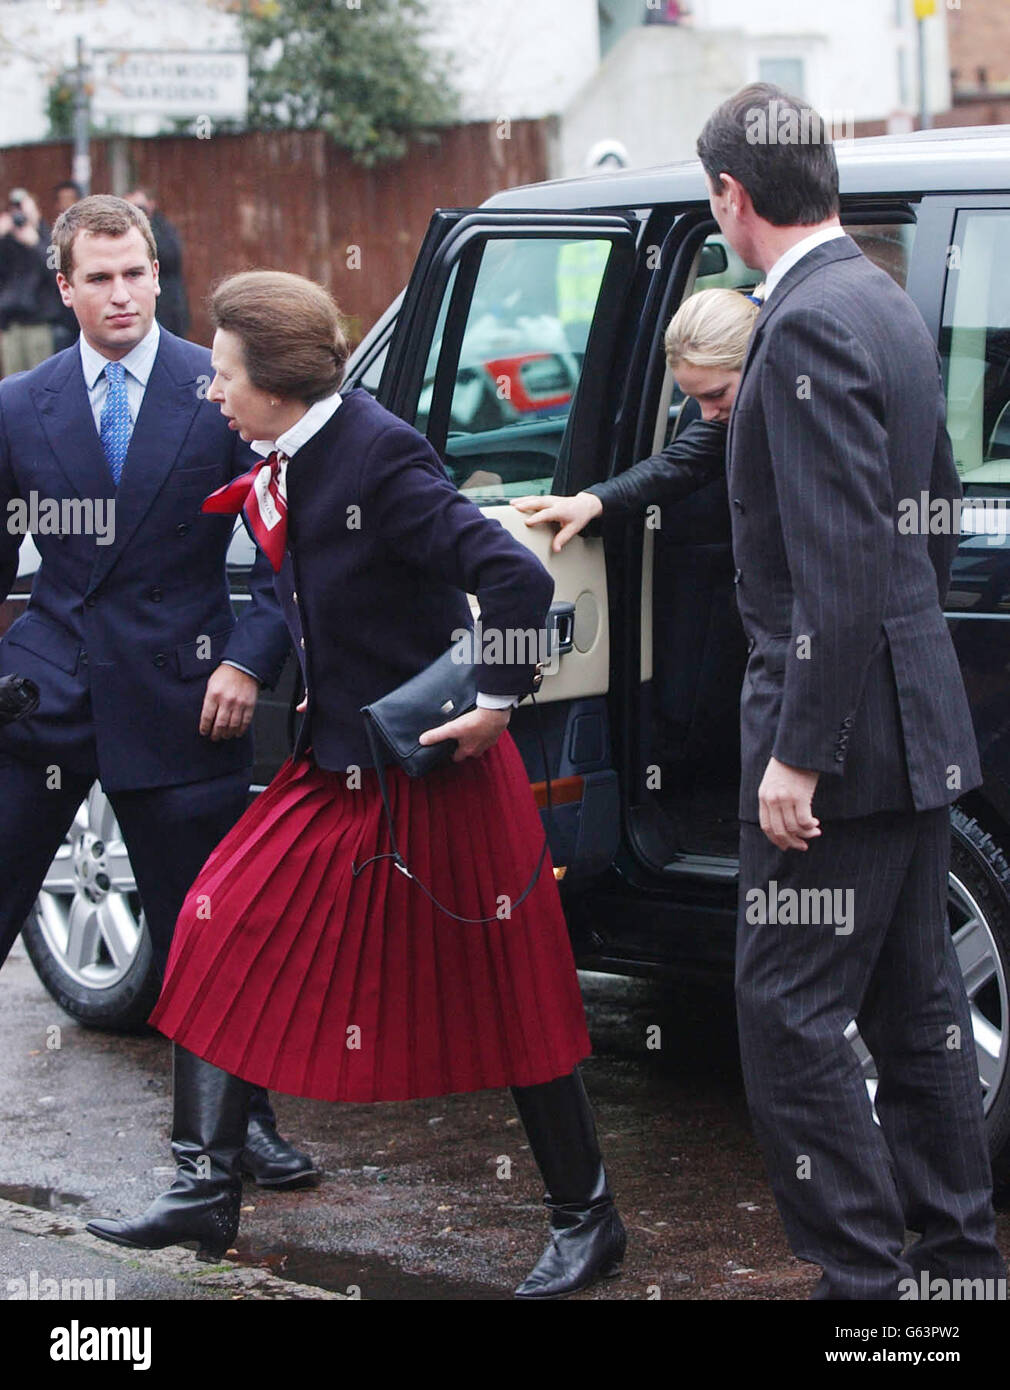 The Princess Royal and her husband, Commander Tim Laurence (right) arrive with her children, Peter and Zara Phillips at East Berkshire Magistrates Court in Slough to face allegations that her dog bit two children in Windsor Great Park. * The couple have been summonsed under Section 3 (1) of the Dangerous Dogs Act 1991 and are alleged to have been in charge of a dog that was dangerously out of control in a public place and injured the children. The Princess would become the first royal to have a criminal record if convicted of the charges. Stock Photo